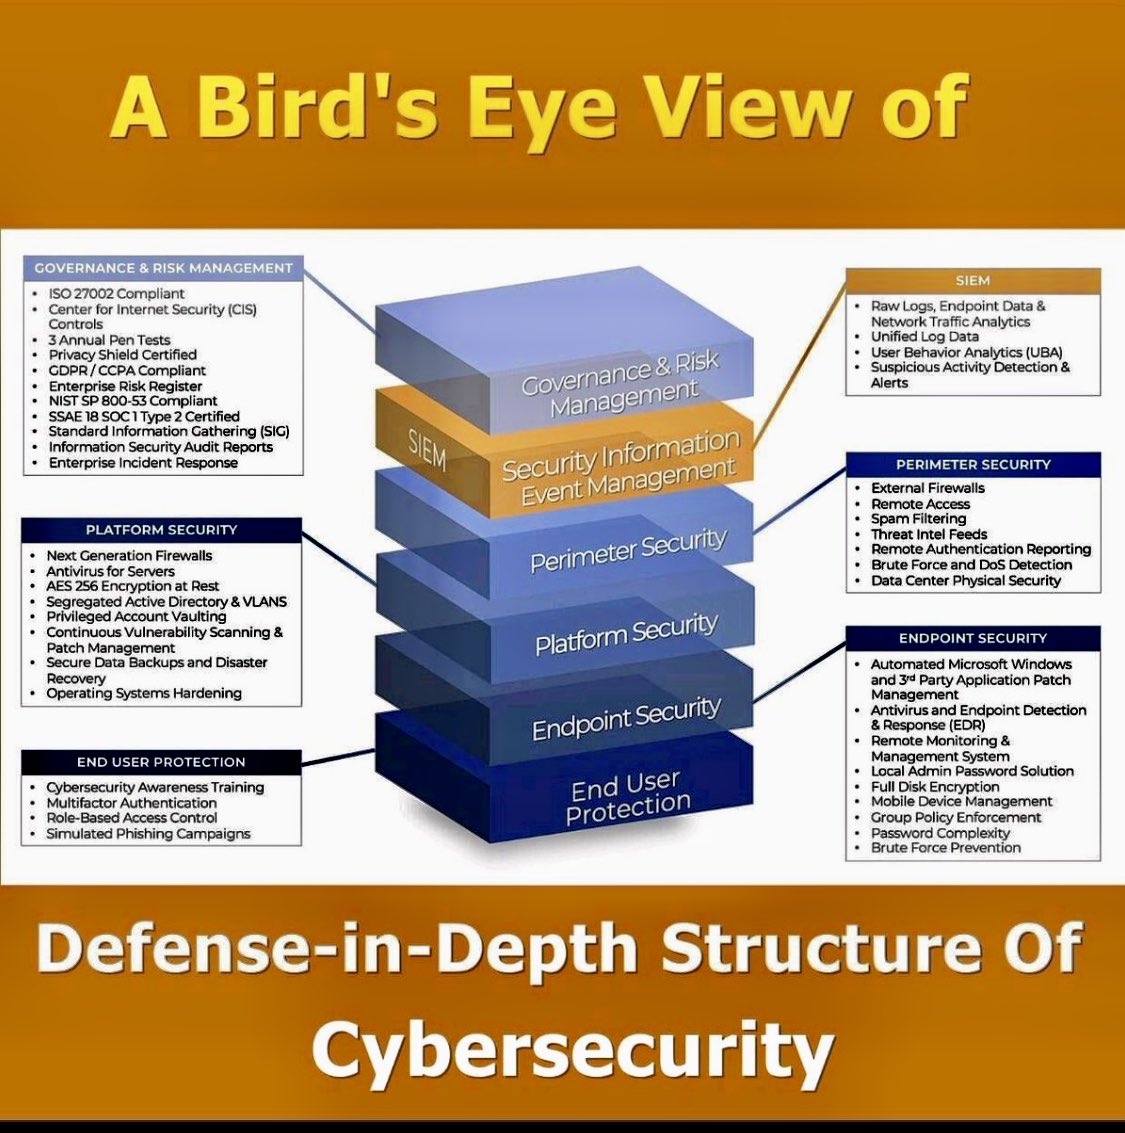 Defense-in-Depth Structure of Cybersecurity